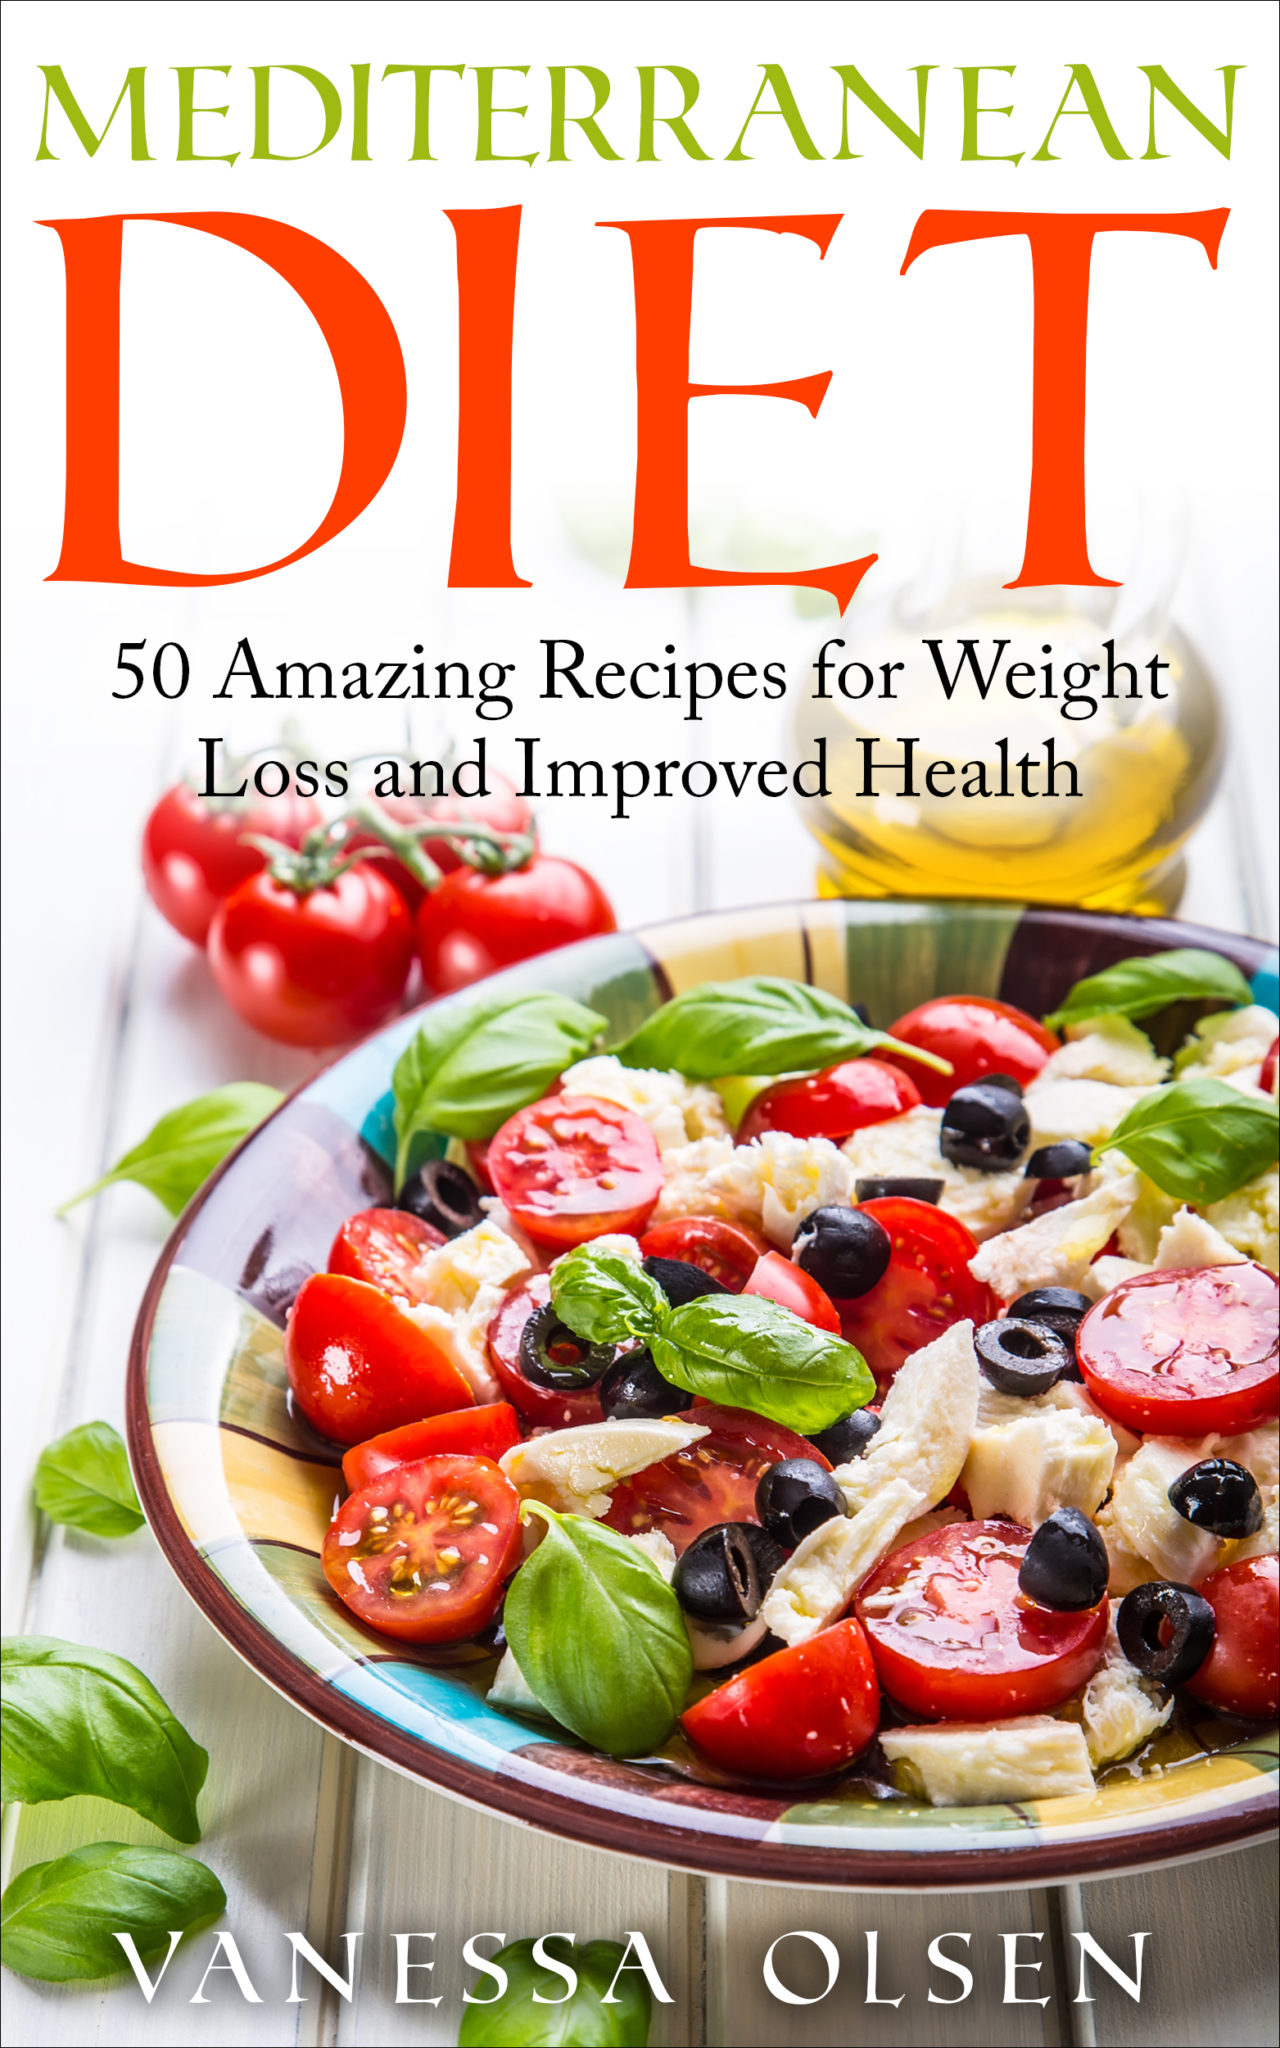 FREE: Mediterranean Diet – Mediterranean Diet for Beginners – 50 Amazing Recipes for Weight Loss and Improved Health by Vanessa Olsen